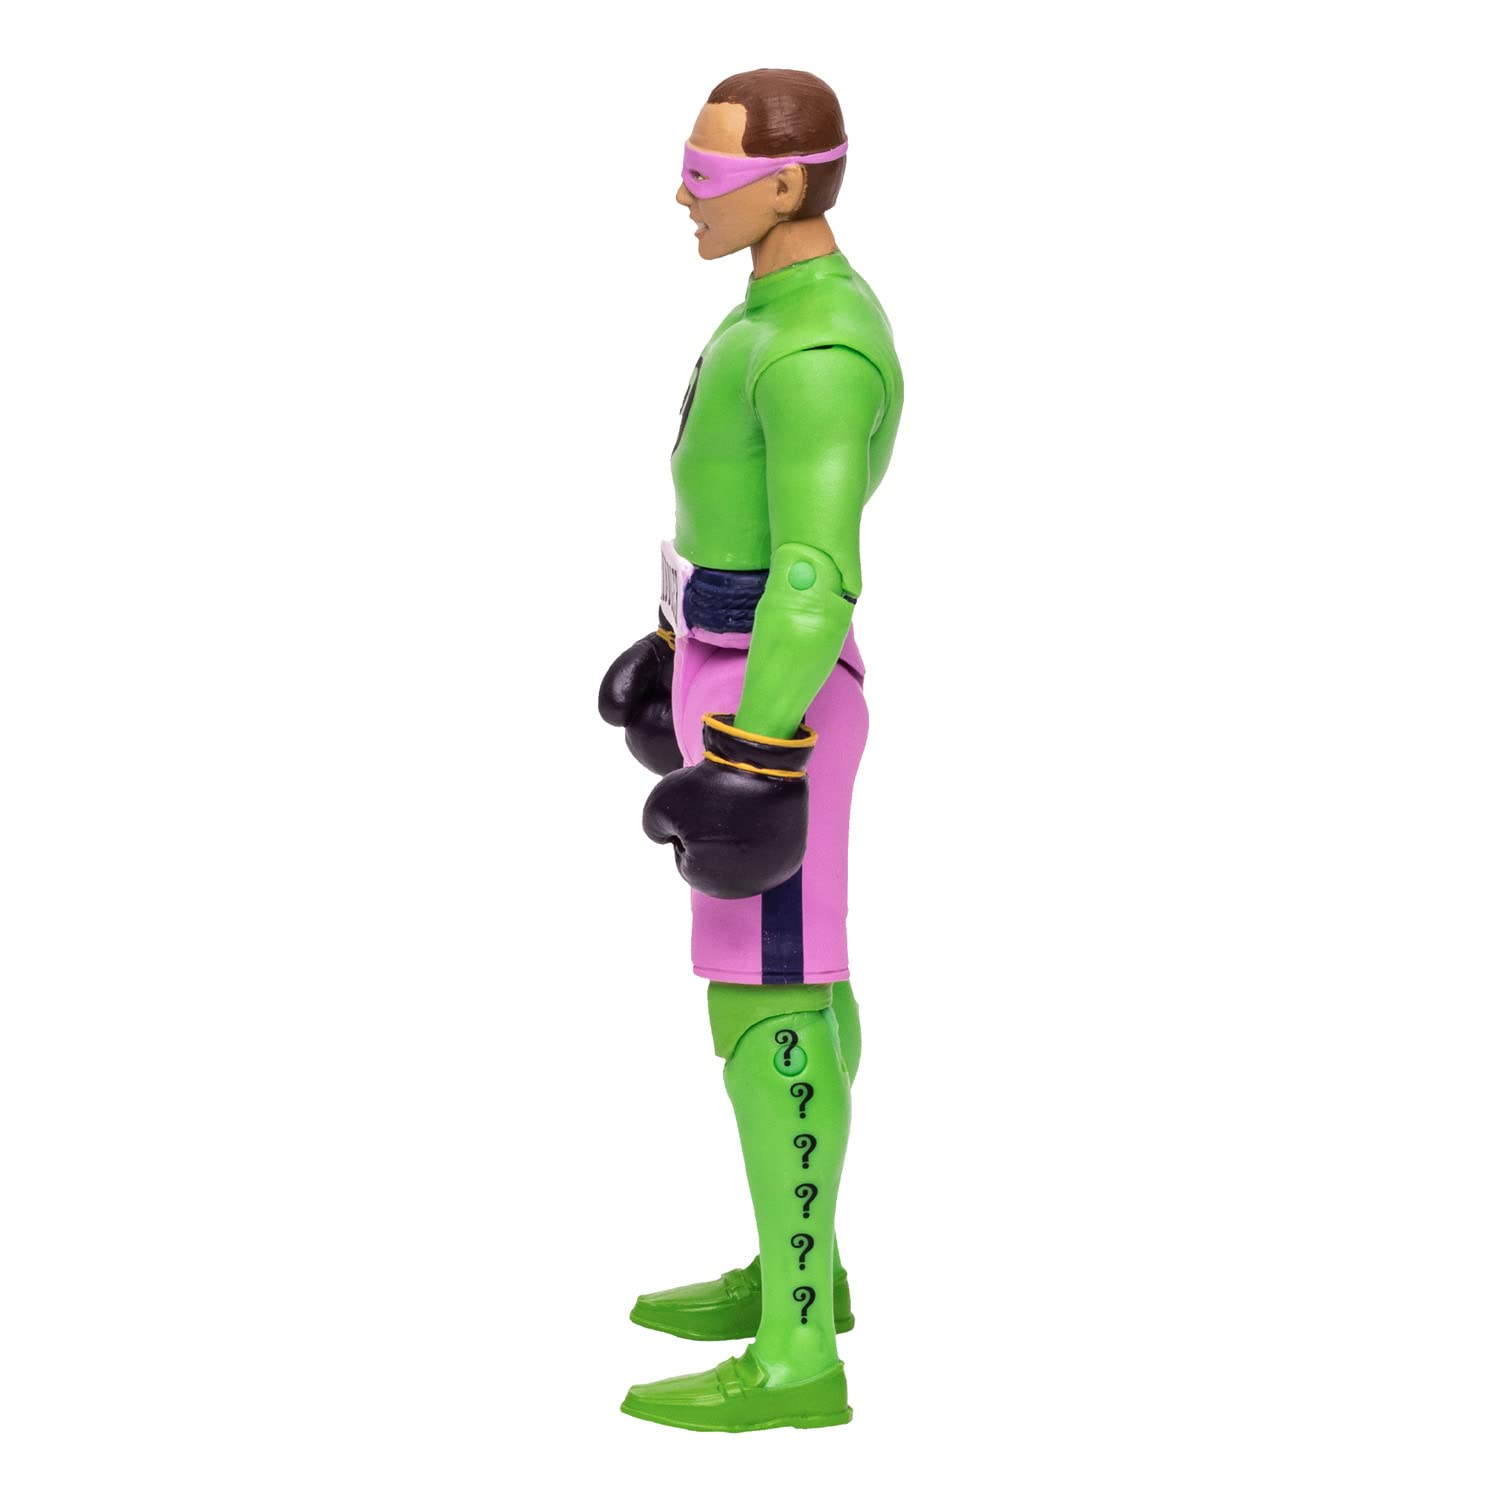 McFarlane Toys, DC Multiverse, 5-inch DC Retro Boxing Riddler Figure with Action Word Bubbles, Boxing Riddler Action Figure Collectible DC Retro 1960's TV Figure – Ages 12+